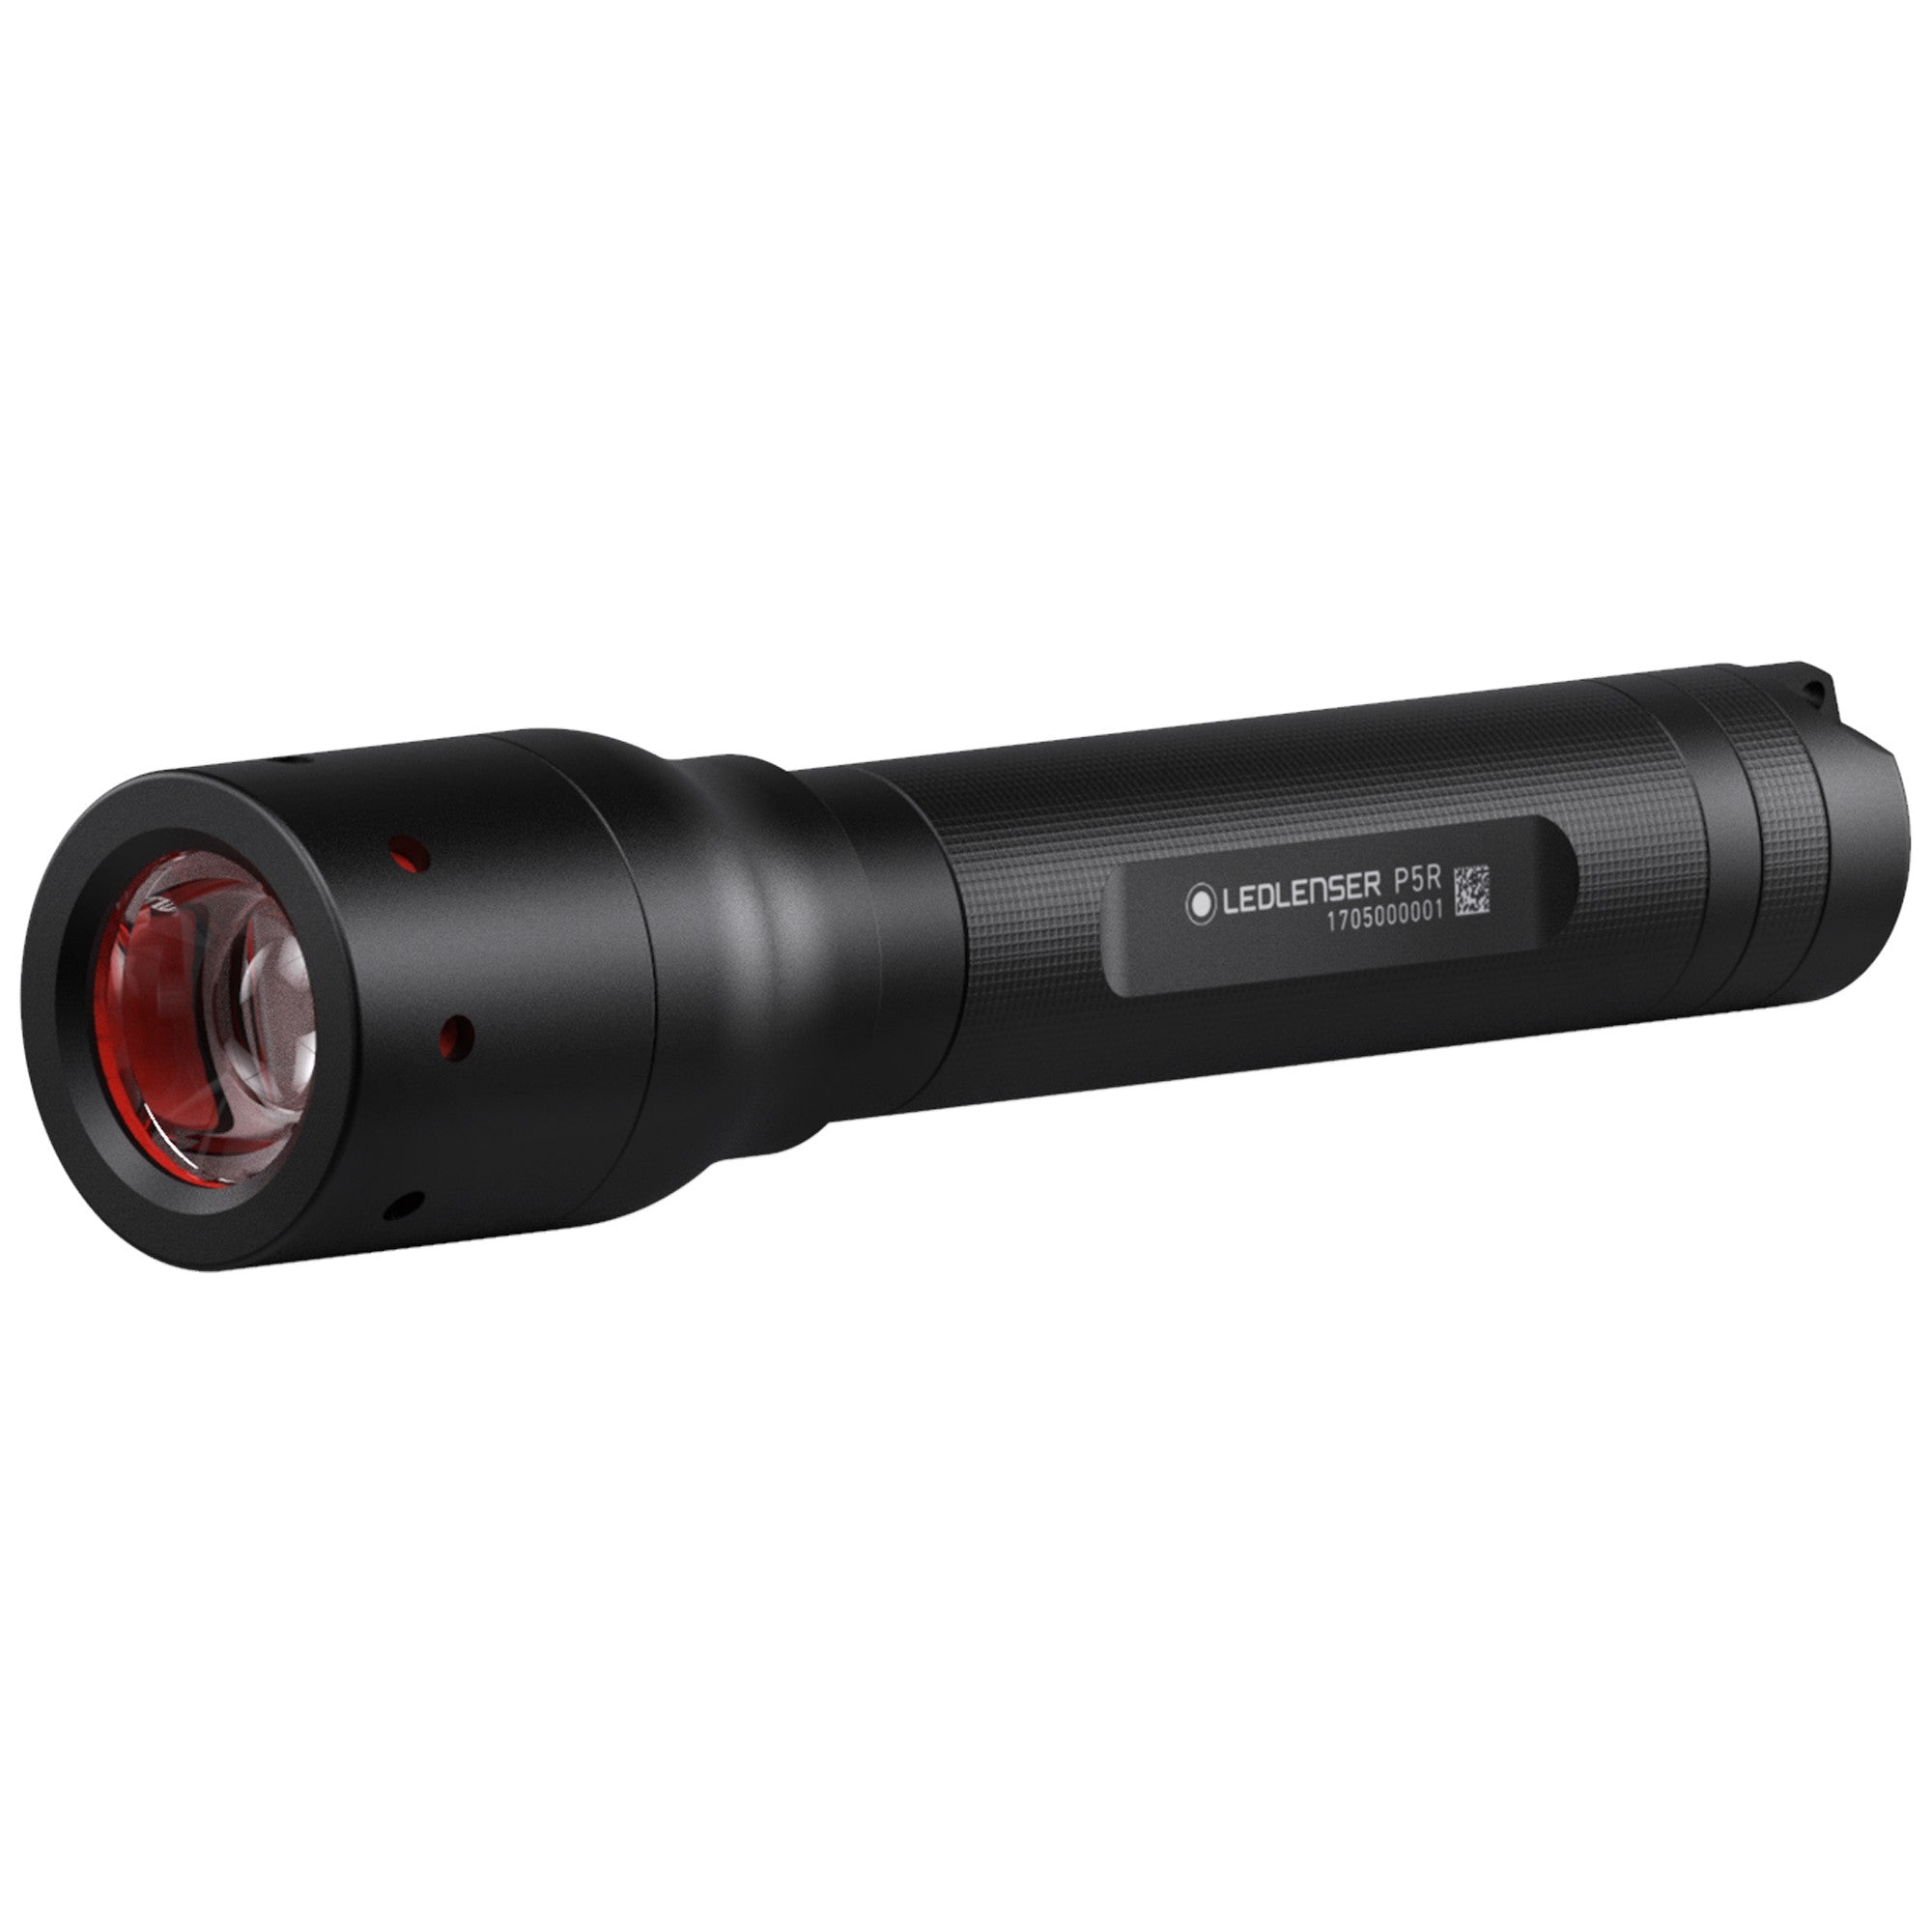 Discontinued - P5R Torch